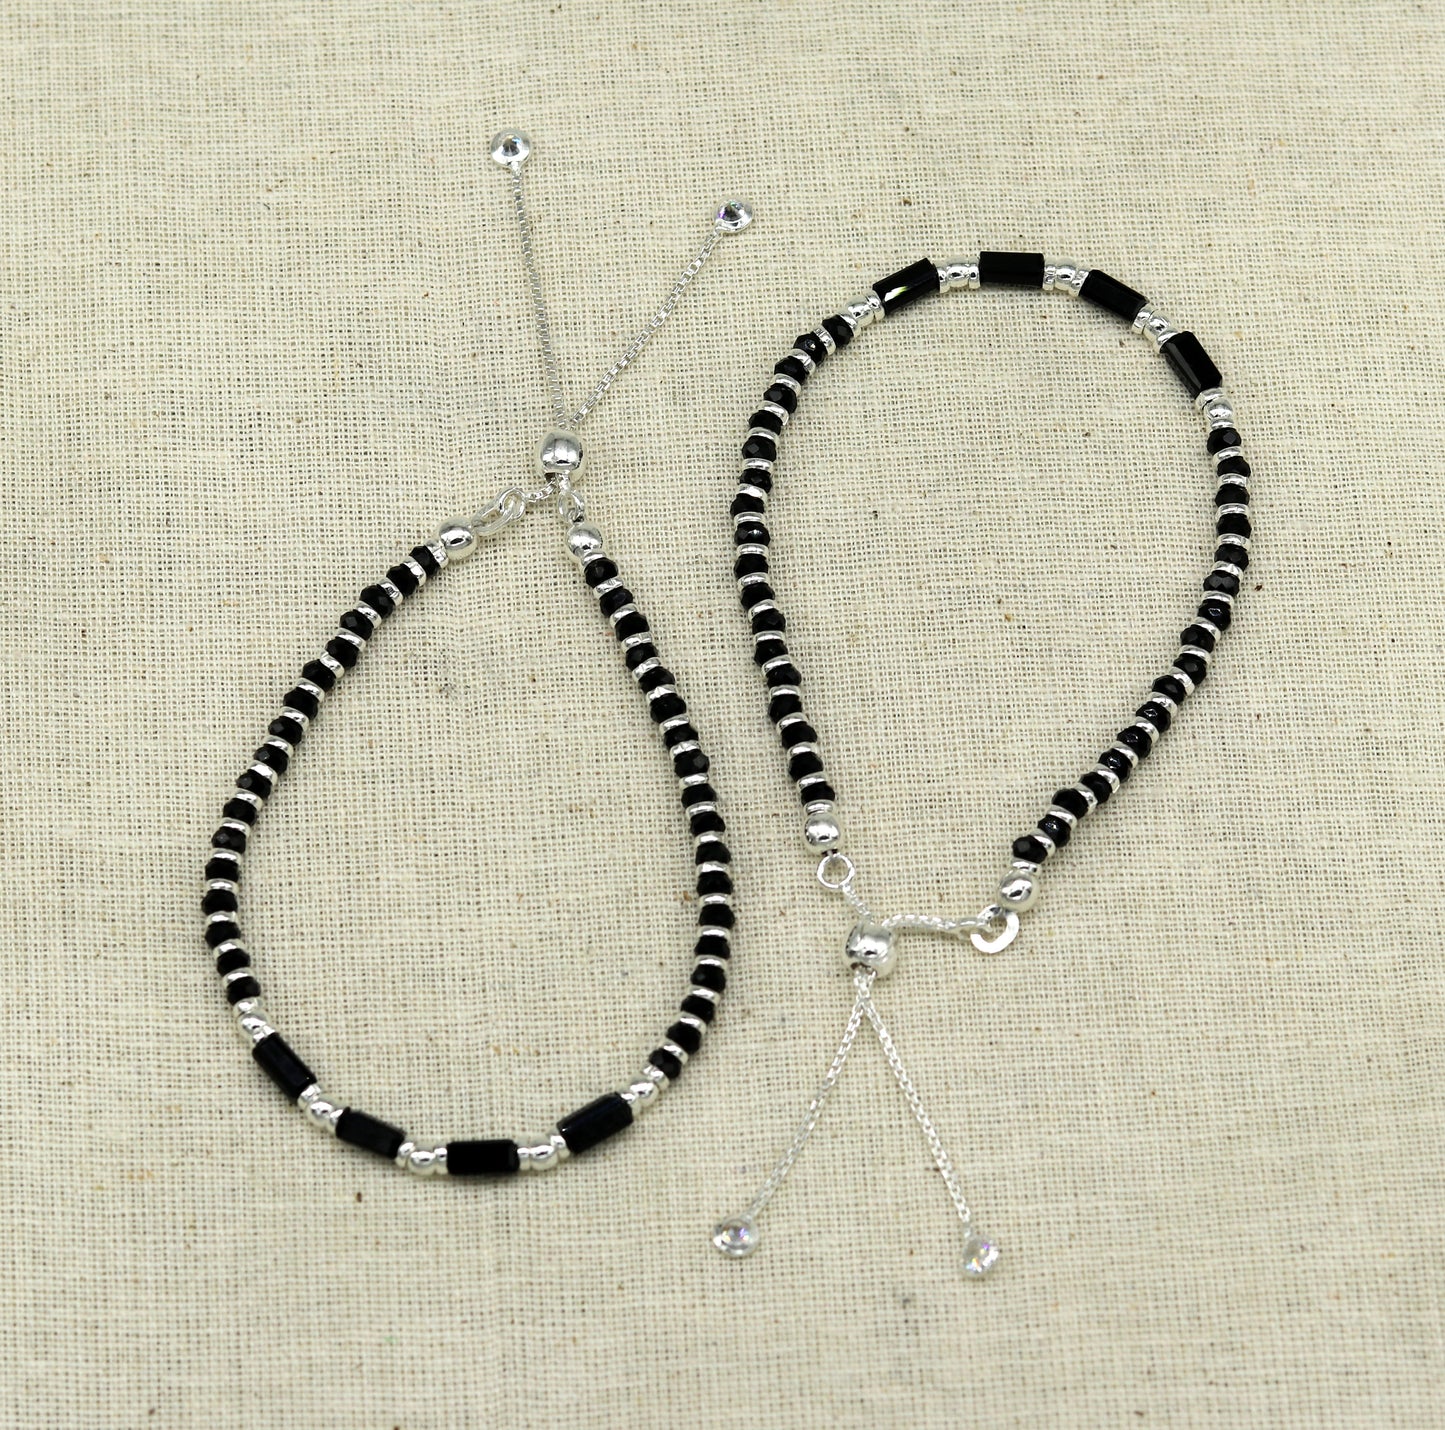 7 inches long handmade 925 sterling silver fabulous silver beads, black stone charm adjustable customized single bracelet for girl's gifting sbr170 - TRIBAL ORNAMENTS